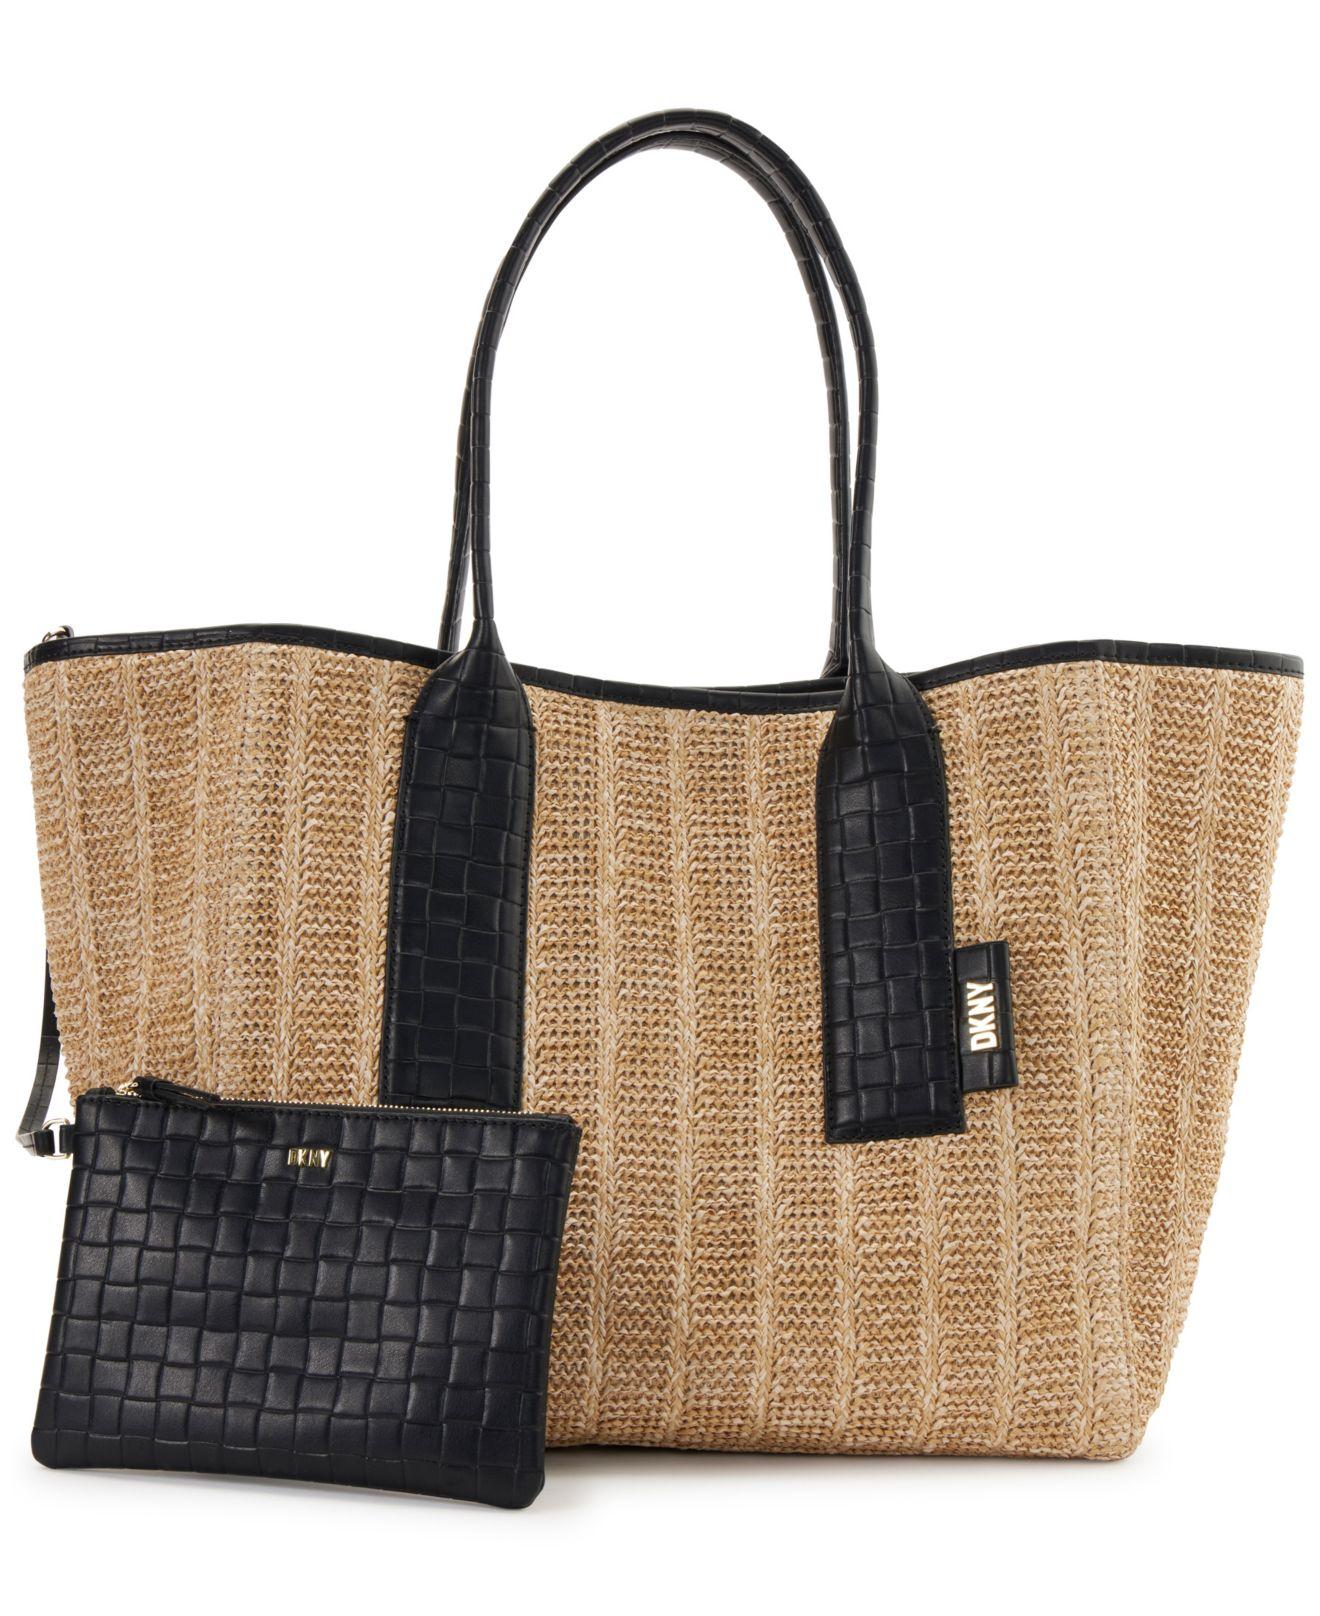 DKNY Grayson Large Tote in Black | Lyst